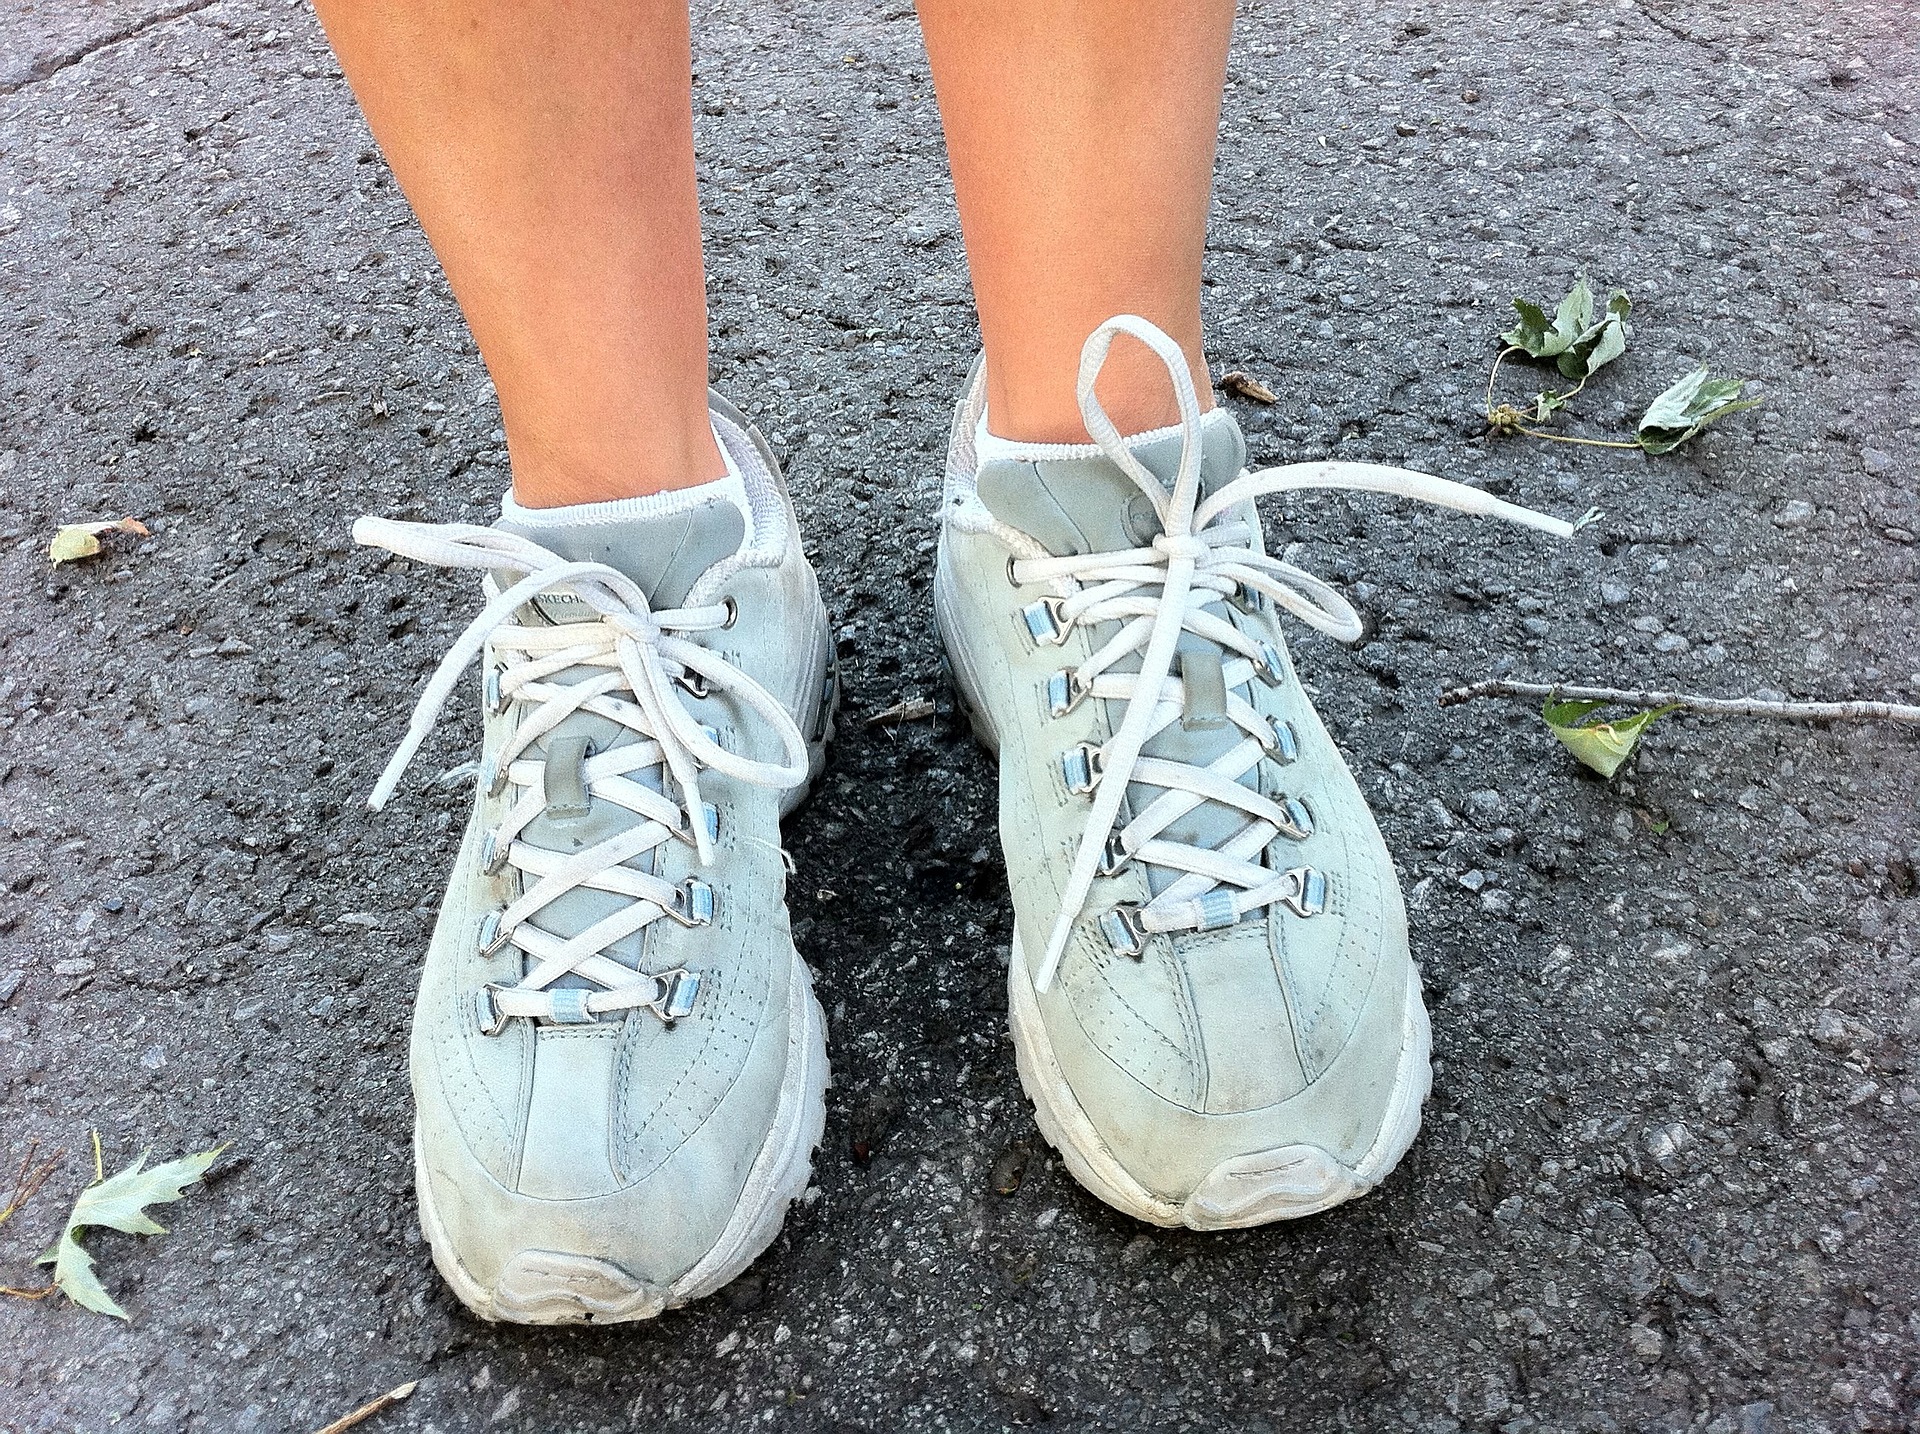 close up of a pair of feet in light blue running shoes and bare ankles. They stand outside on concrete and there are a few fallen leaves.